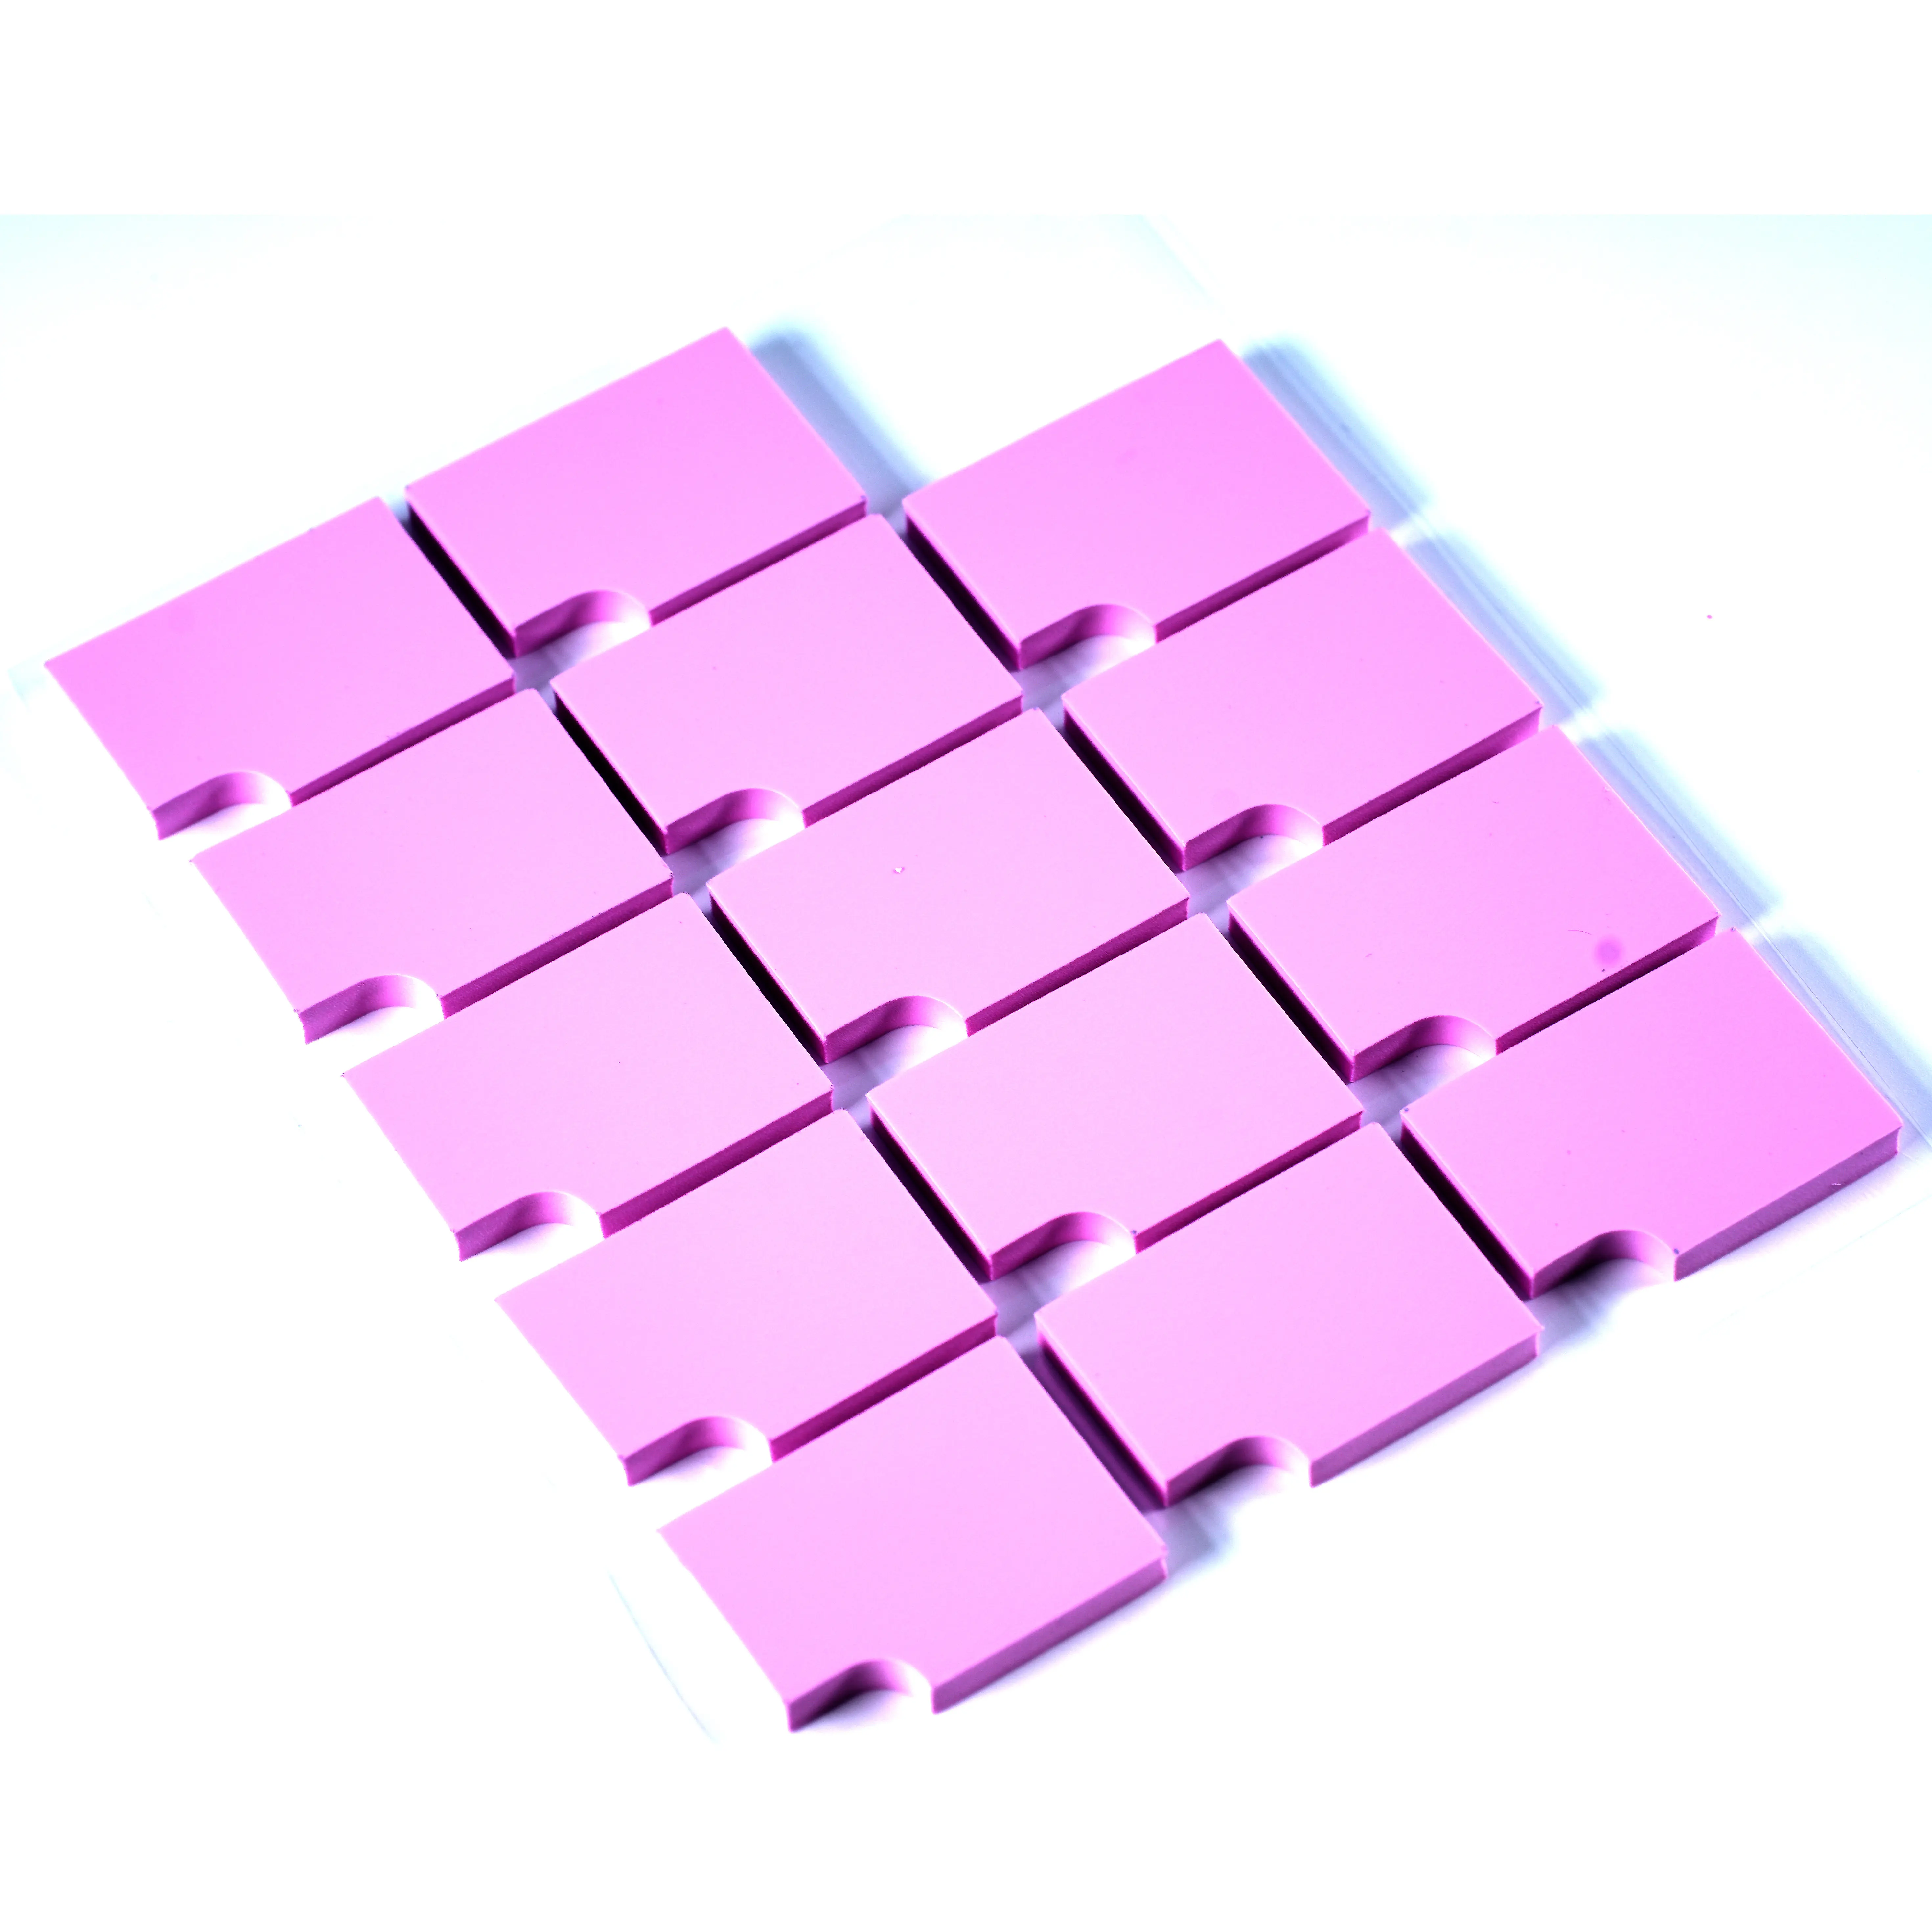 Haopta Sales High Quality Silicon Pad Thermal Silicone Rubber Thermal Insulation Pad Thermal Pad Silicone For Nvme Ssd